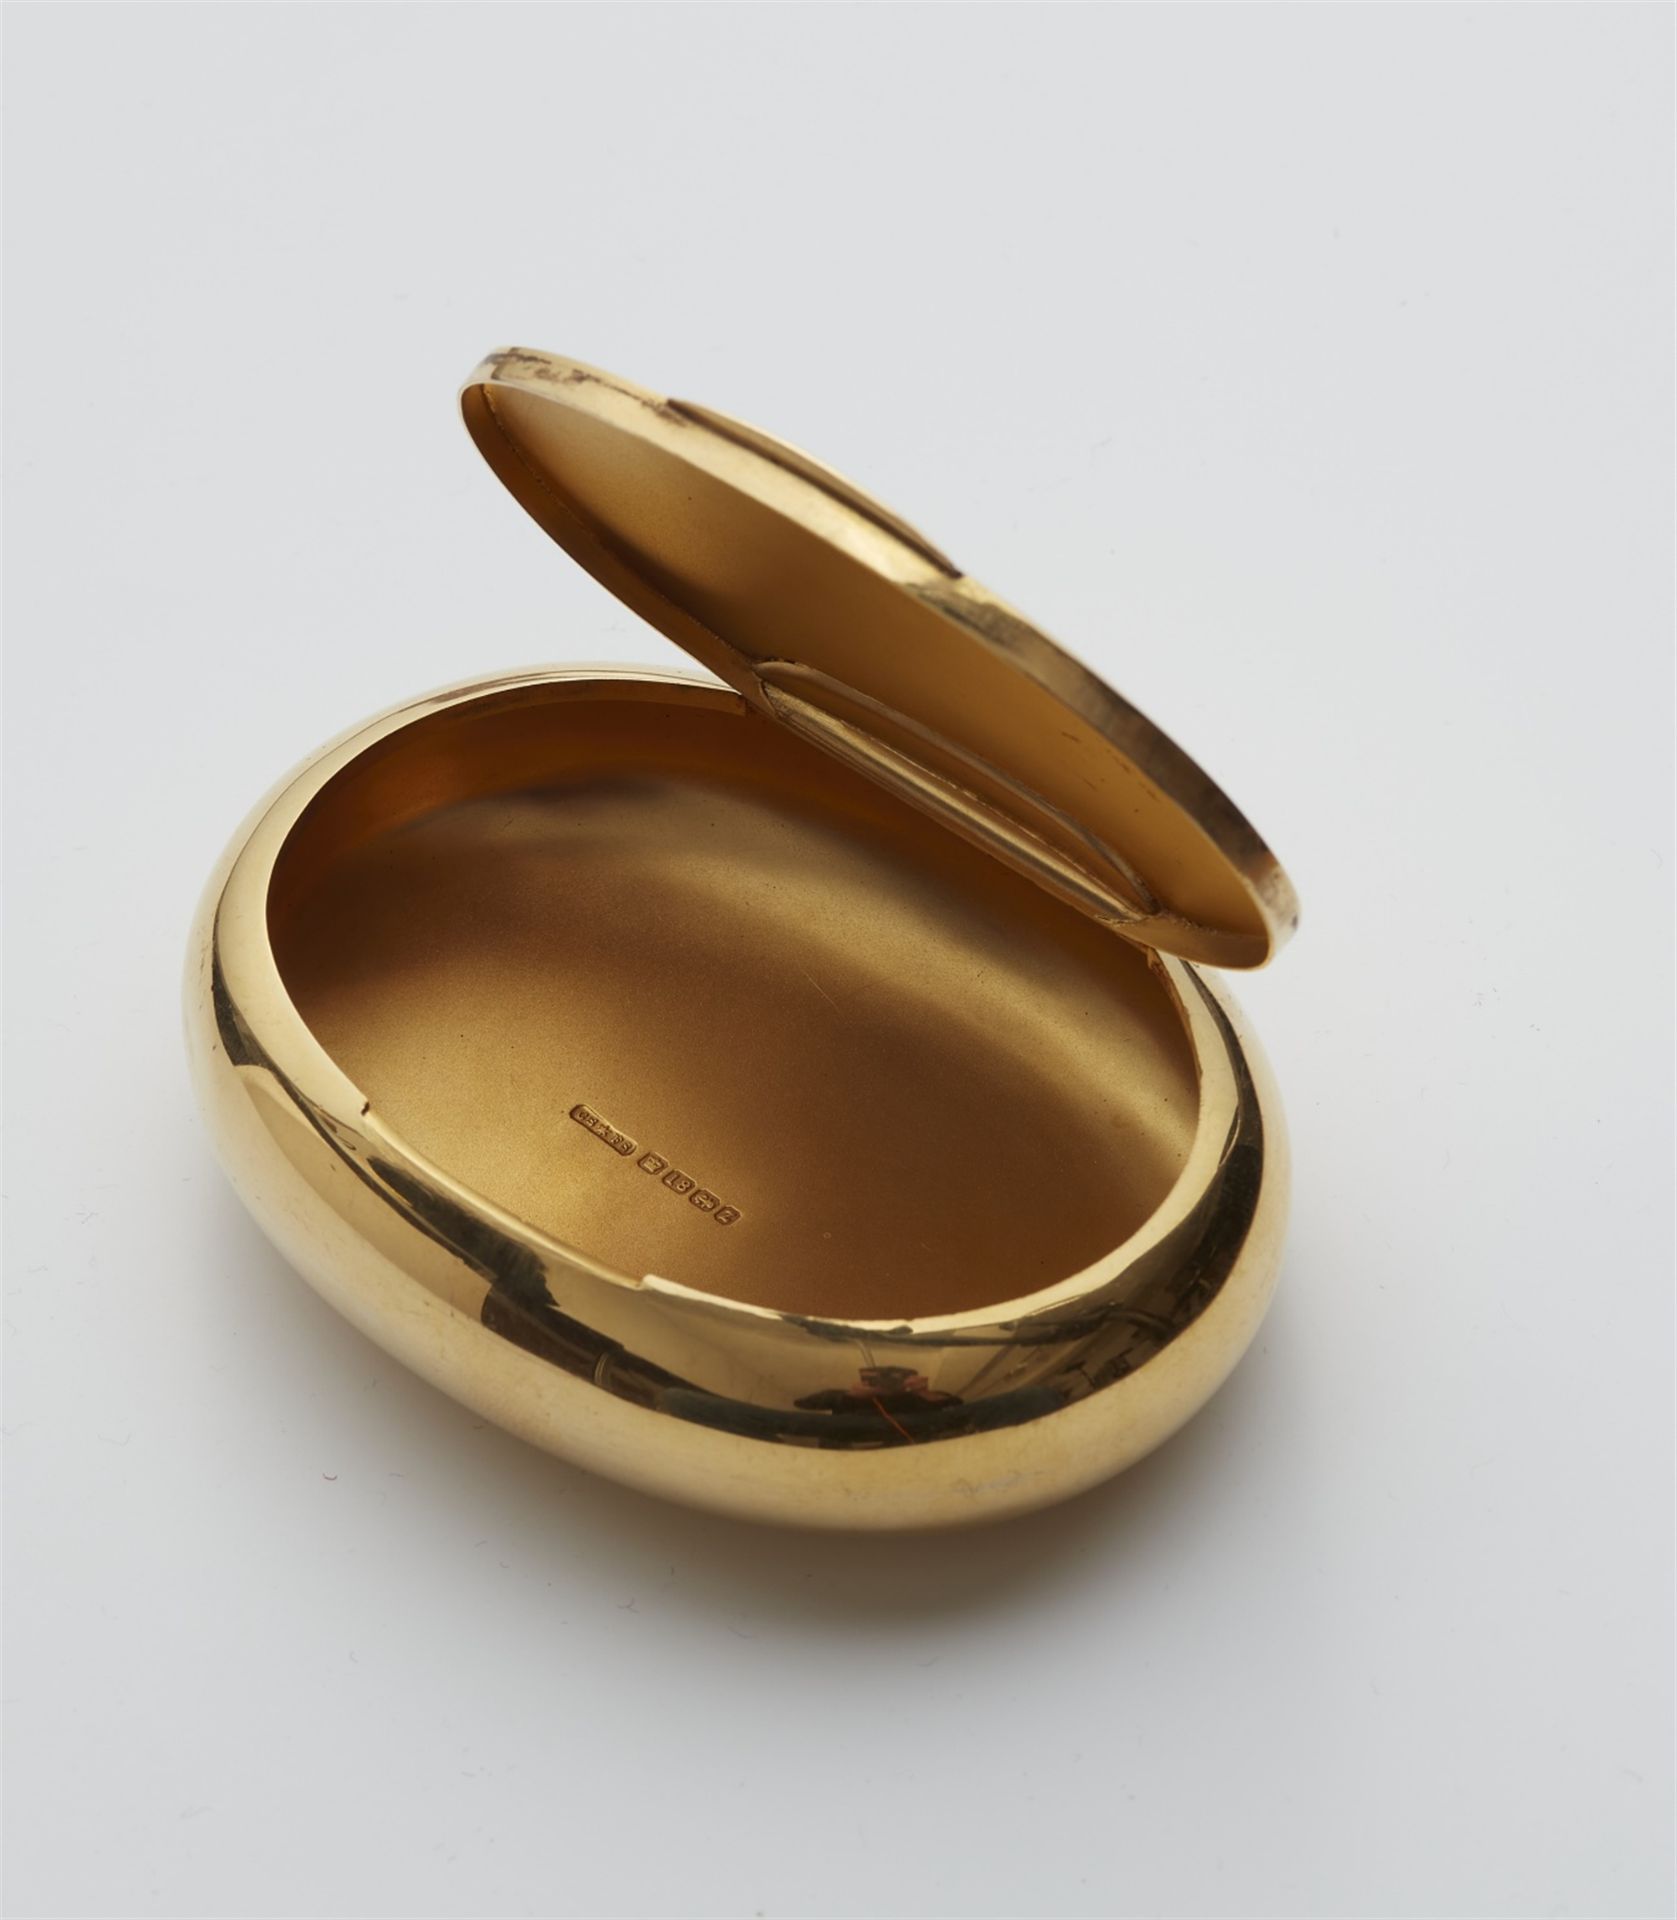 An 18k gold snuff box with an enamelled crest - Image 3 of 3